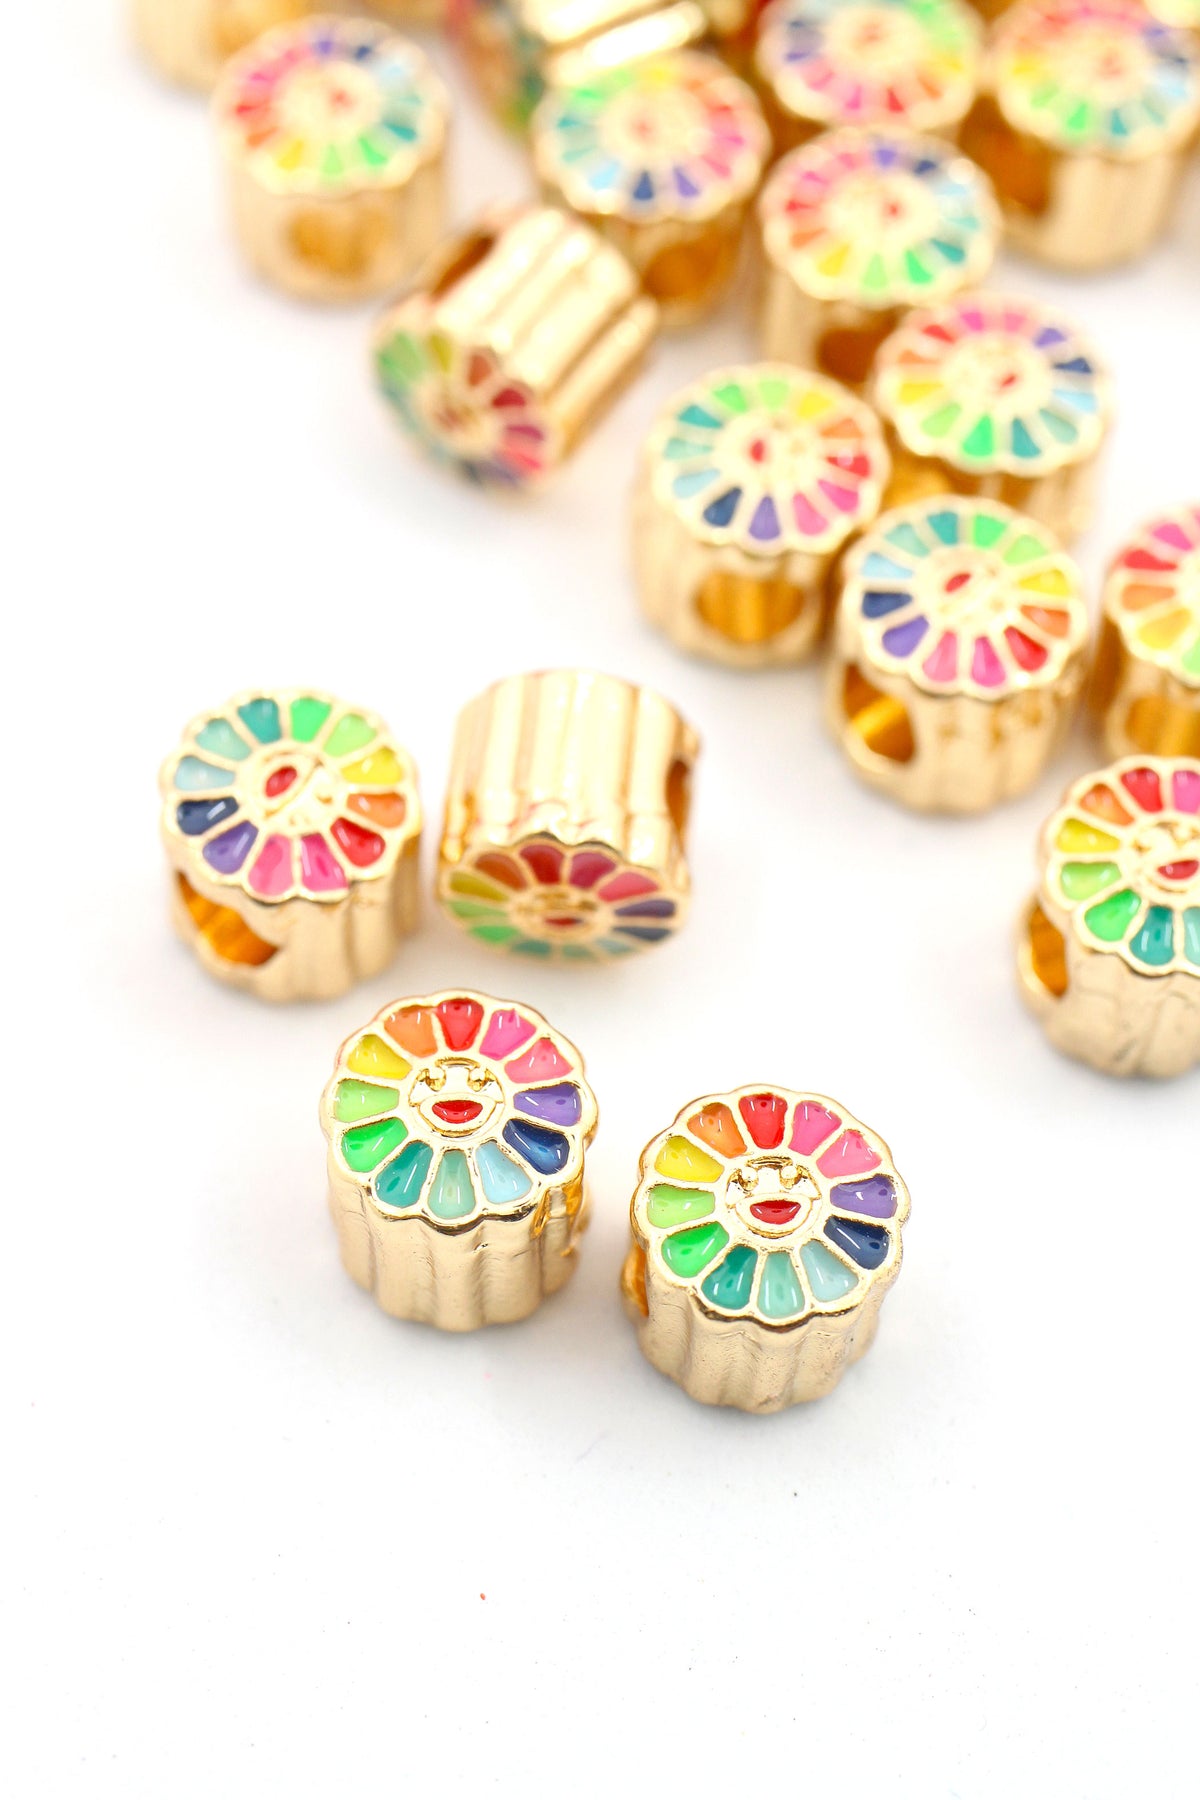 20pcs 5x6mm Tube Enamel Beads Painted Grease Colorful Beads For Bracelets  Making Rainbow Jewelry Making Accessory Supplier